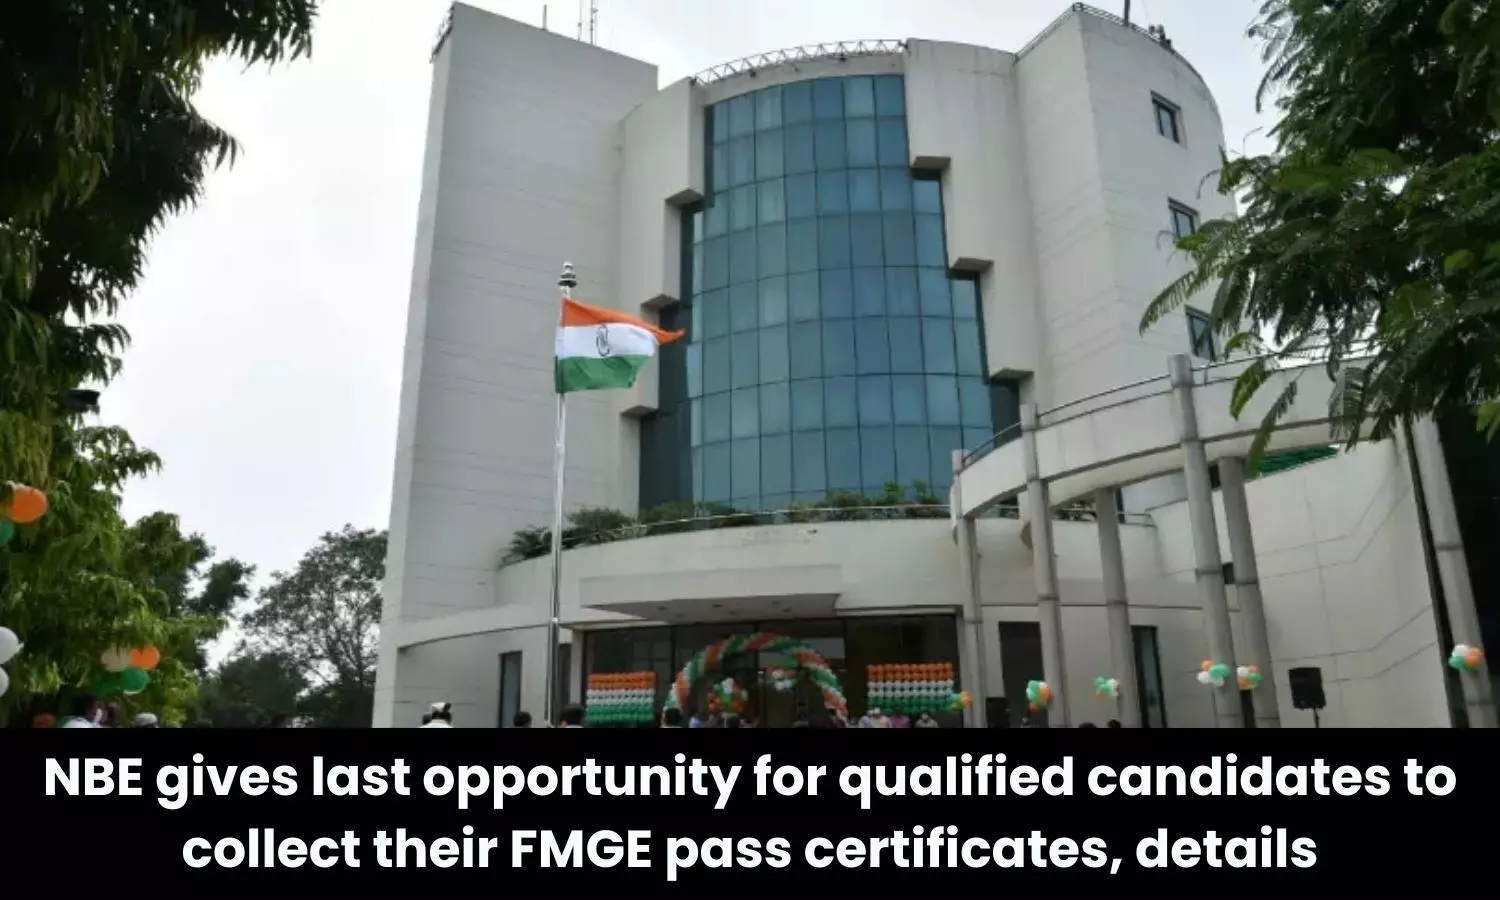 Last opportunity: NBE asks FMGE-qualified candidates to collect FMGE pass certificates